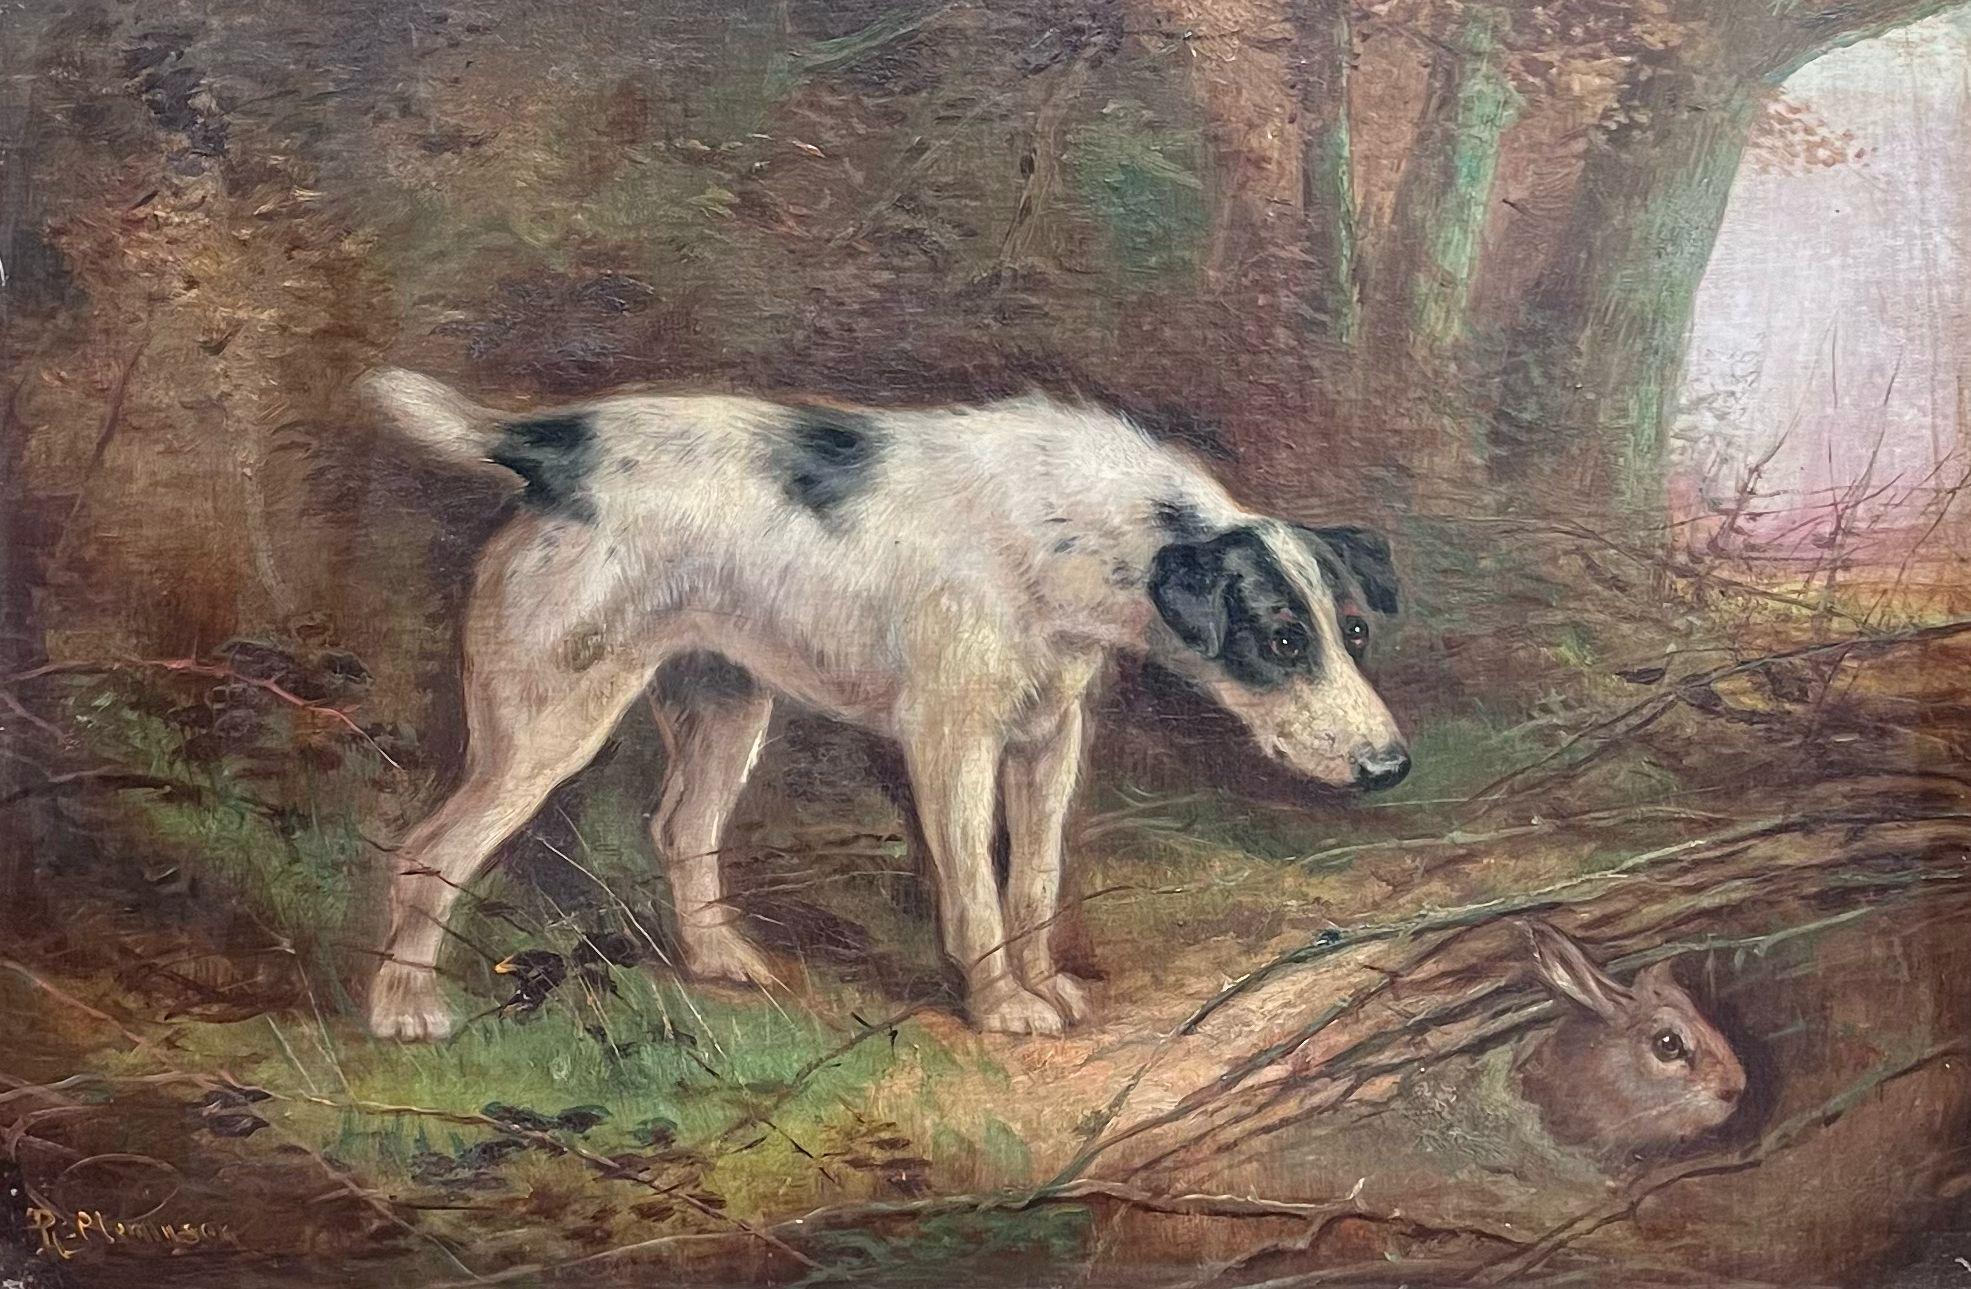 The Terrier and the Rabbit
by ROBERT CLEMINSON (1864-1903)
signed 
oil on canvas, framed
framed: 24 x 32 inches
canvas: 16 x 24 inches
provenance: private collection, England
condition: very good and sound condition, please note the frame is antique